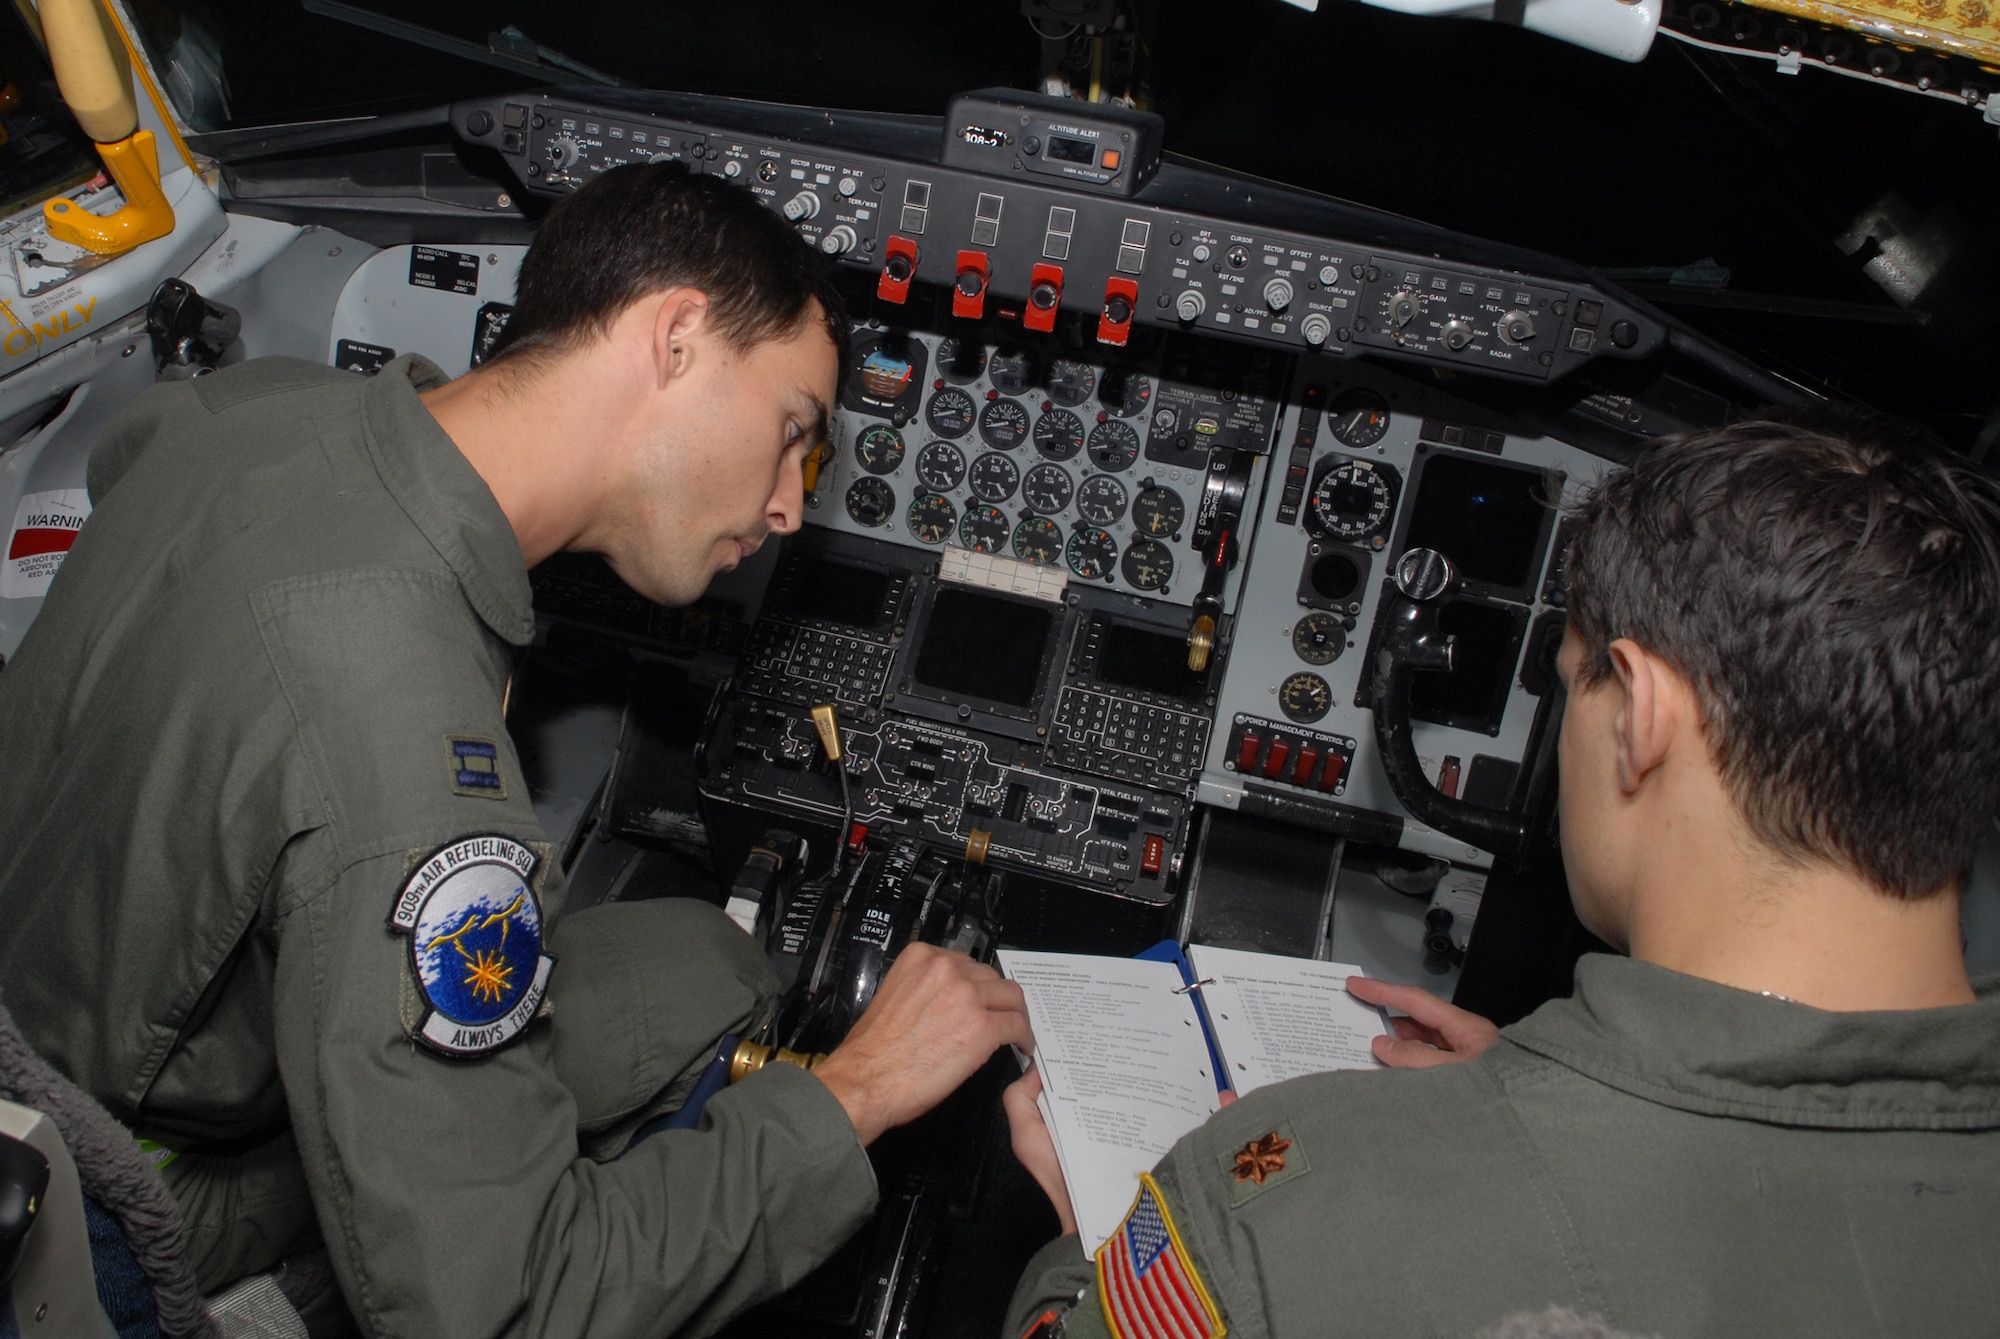 Capt. Denique Asion, and Maj. Michael Kallai, 909th Air Refueling Squadron, go through a KC-135 Stratotanker check list prior to takeoff during a simulated aircrew extraction scenario, during Local Operational Readiness Exercise Beverly High 08-3 at Kadena Air Base, Japan, Jan. 9, 2007. The 18th Wing conducted the exercise from Jan. 7 to 11 to test Airmen's ability to respond in contingency situations. (U.S. Air Force photo/Staff Sgt Chrissy FitzGerald)